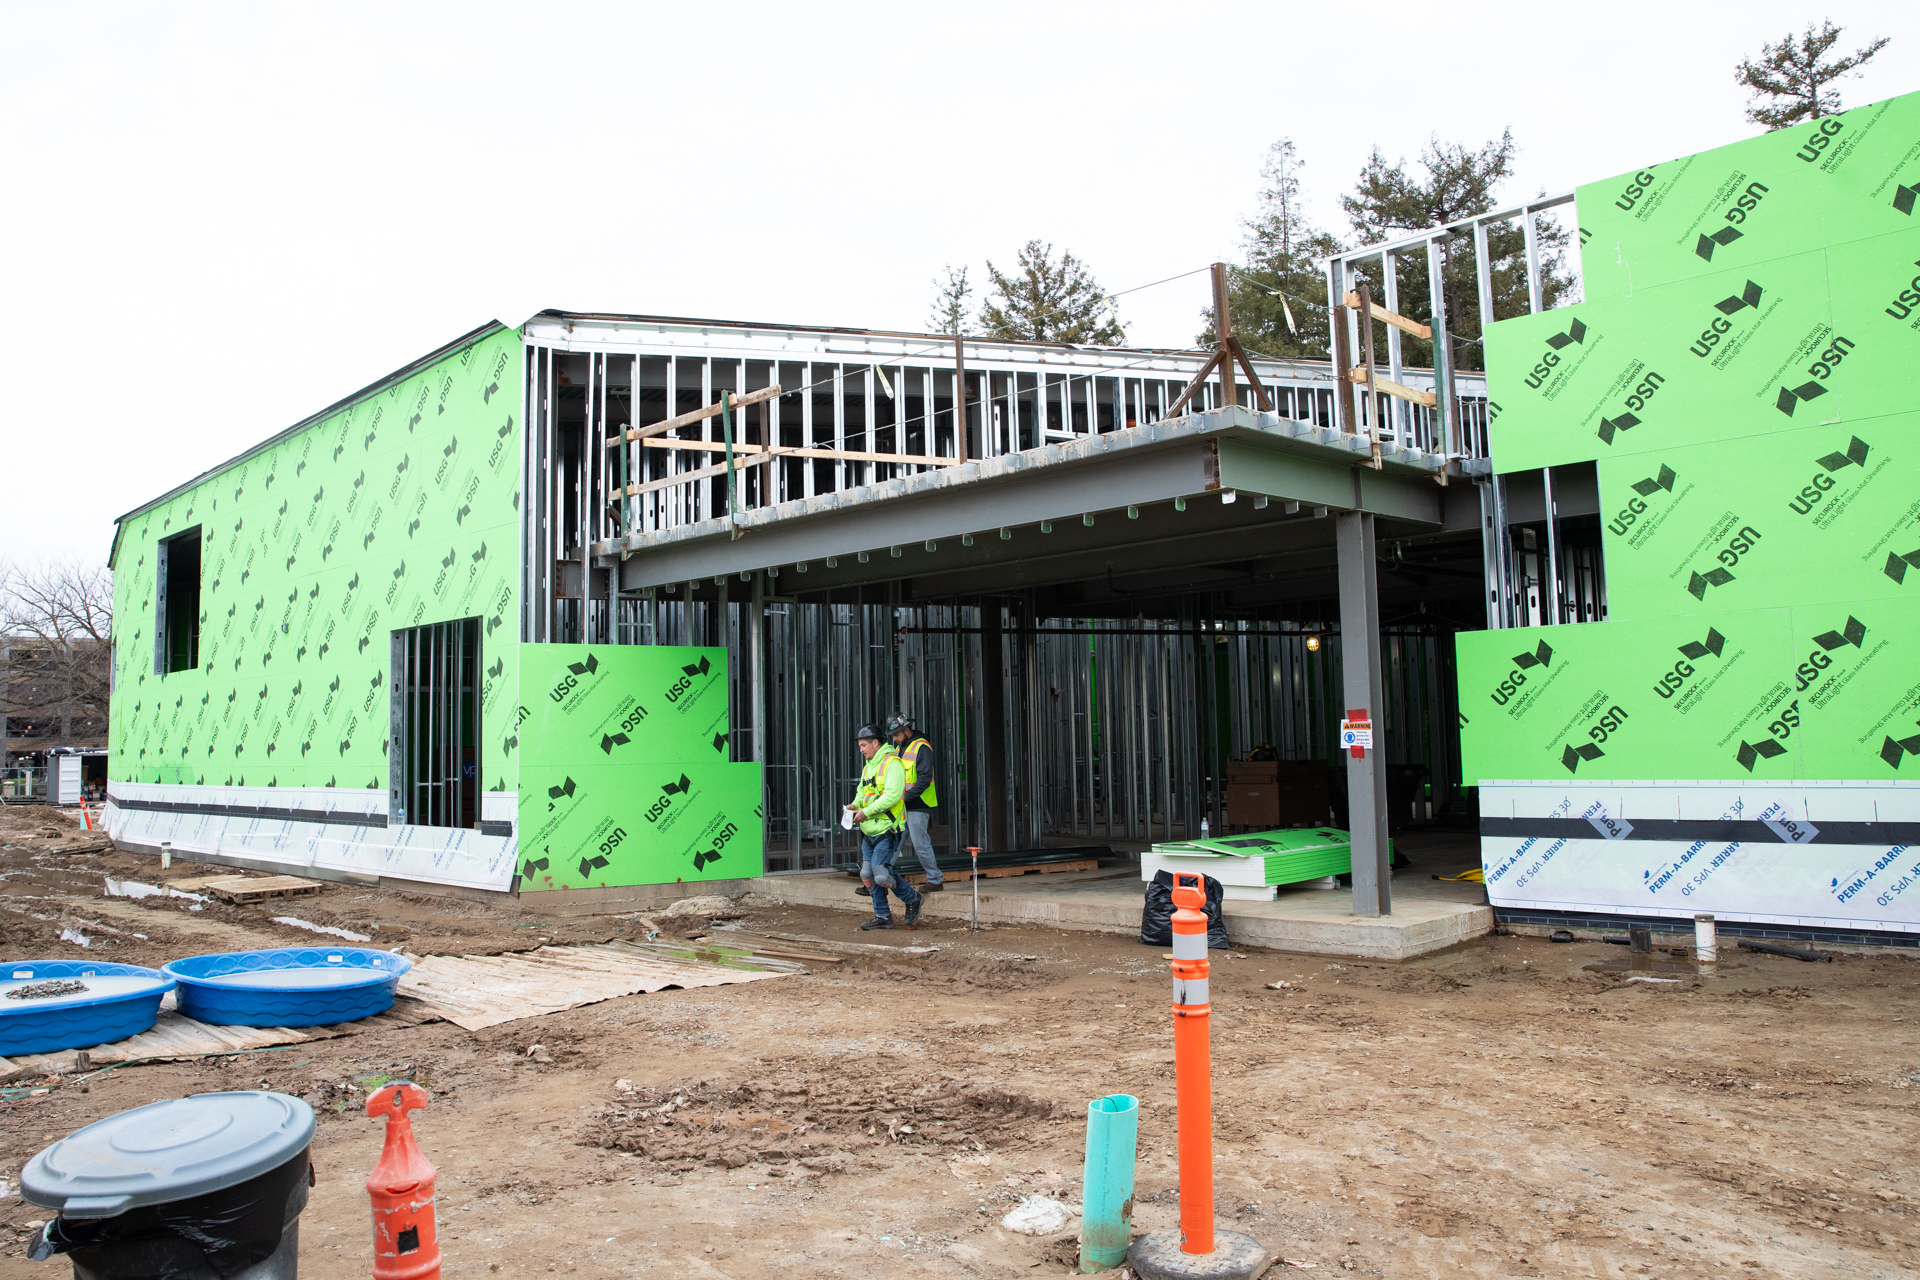 Construction is progressing at the new art building with steel beams and temporary walls up.